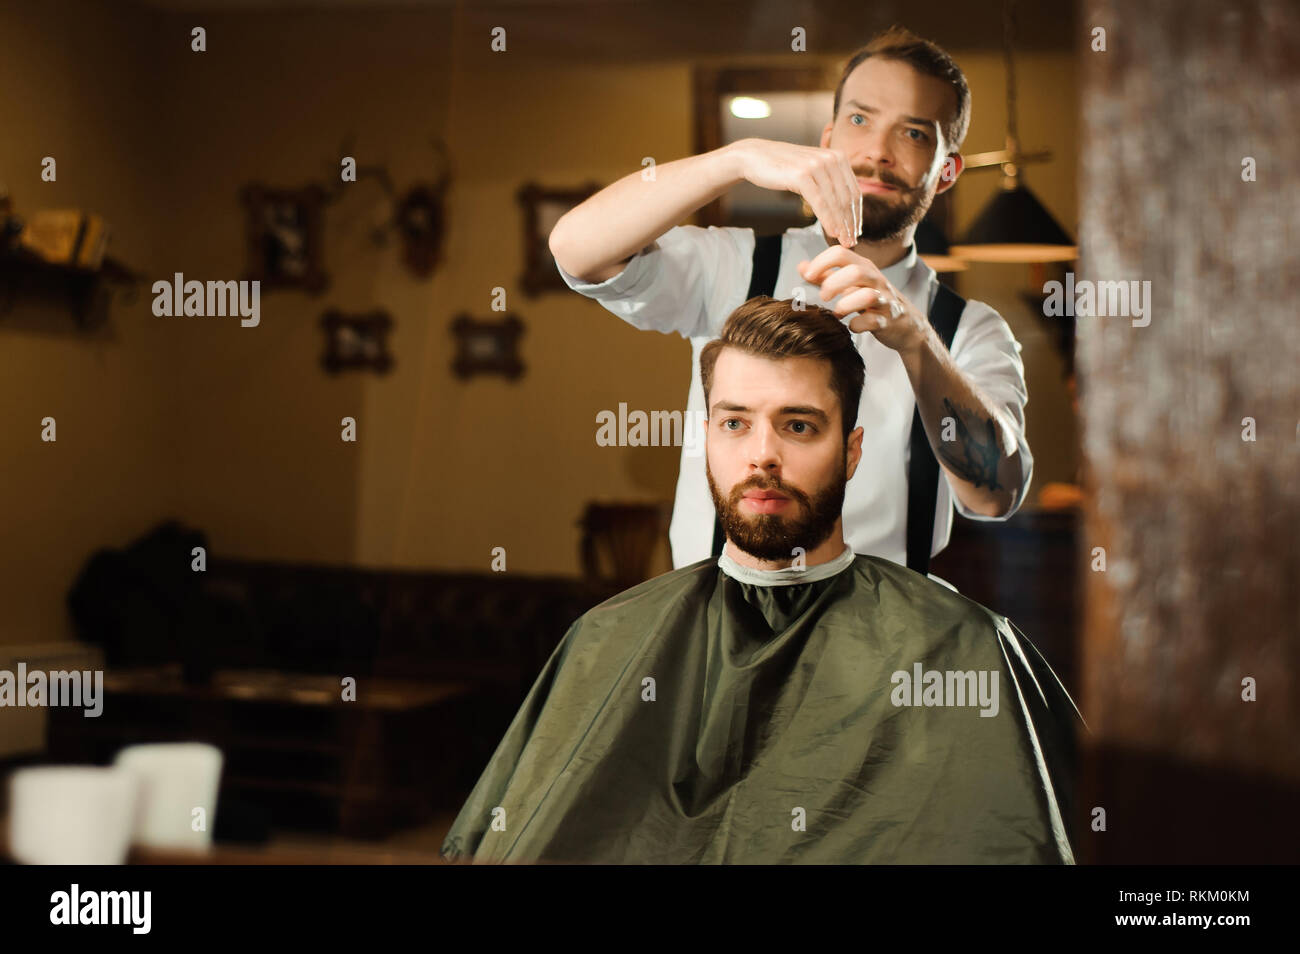 Master cuts hair and beard of men in the barbershop Stock Photo - Alamy